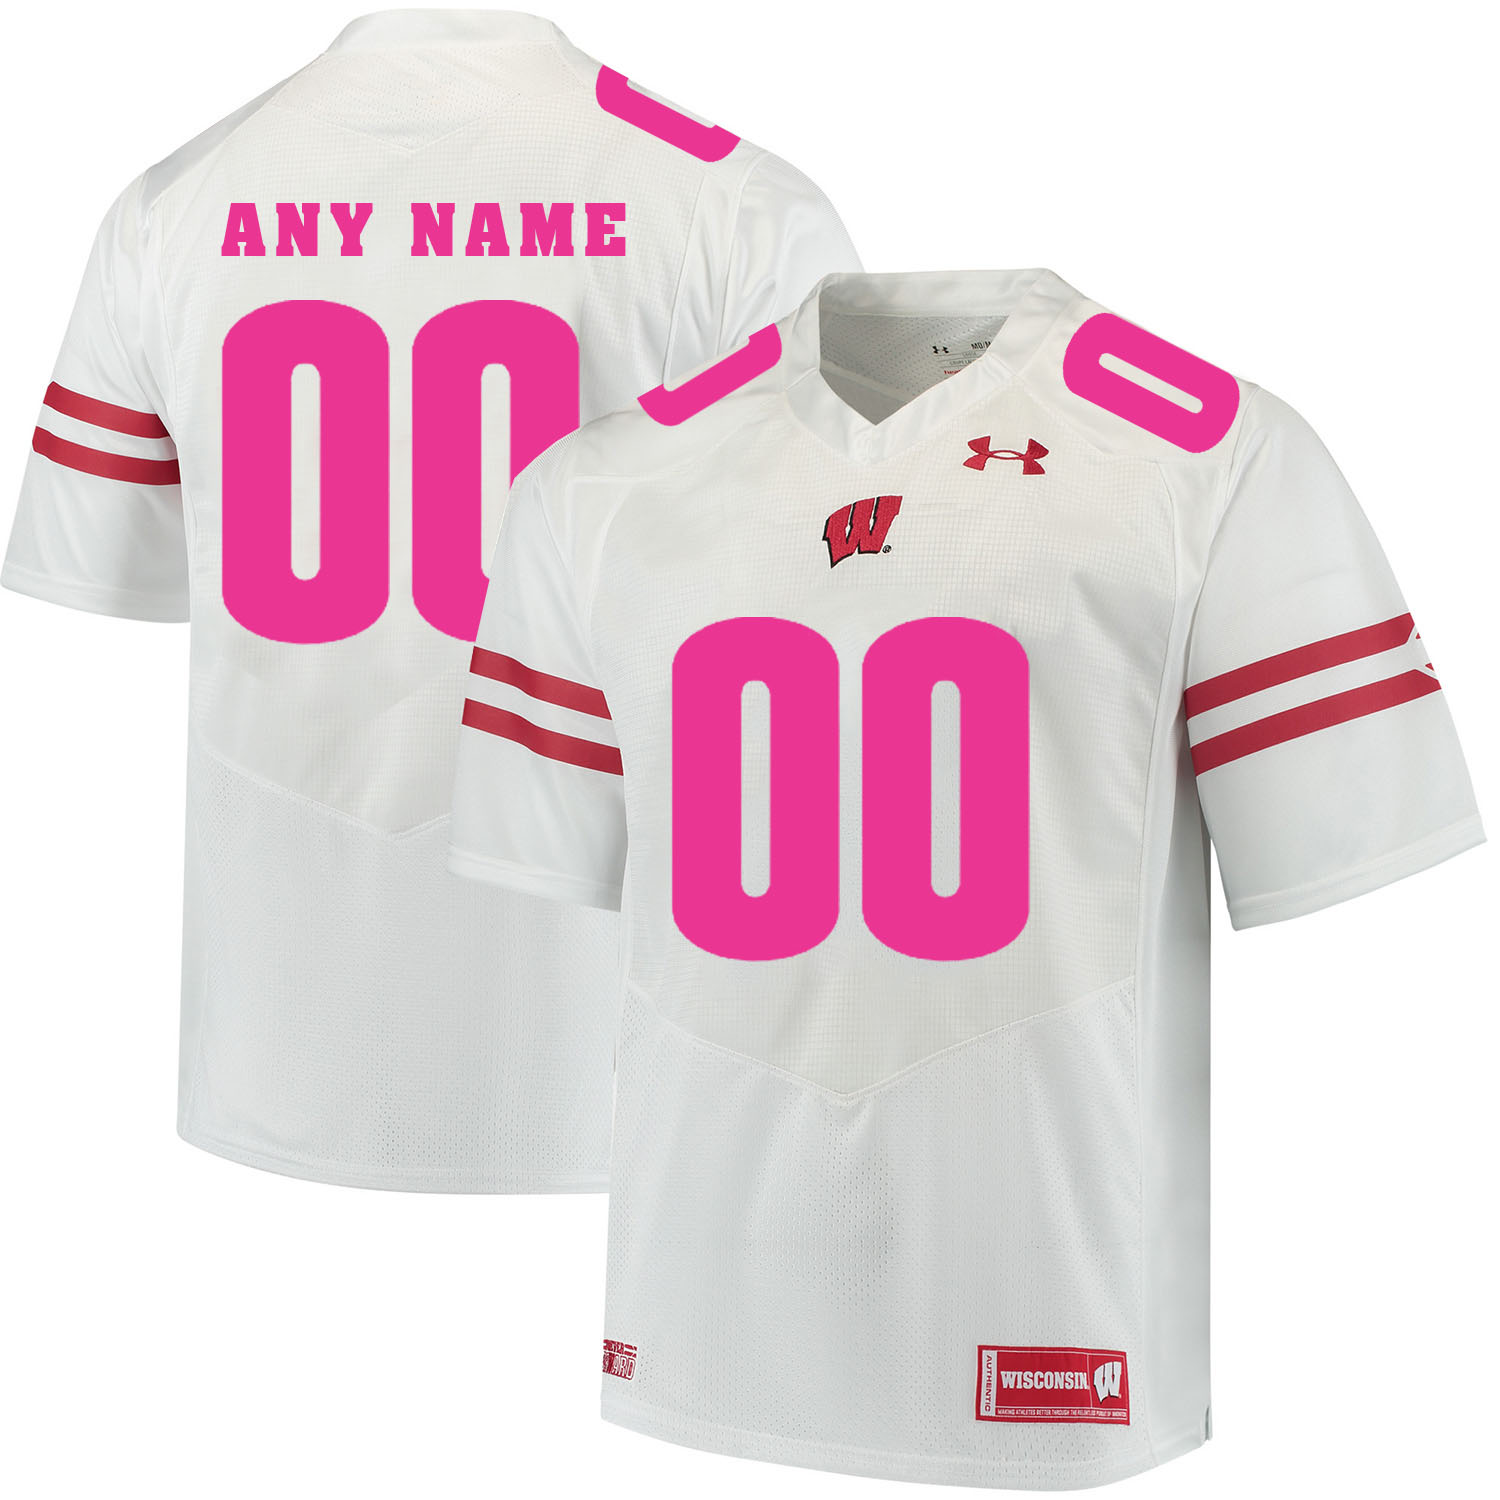 Wisconsin Badgers White Men's Customized 2018 Breast Cancer Awareness College Football Jersey